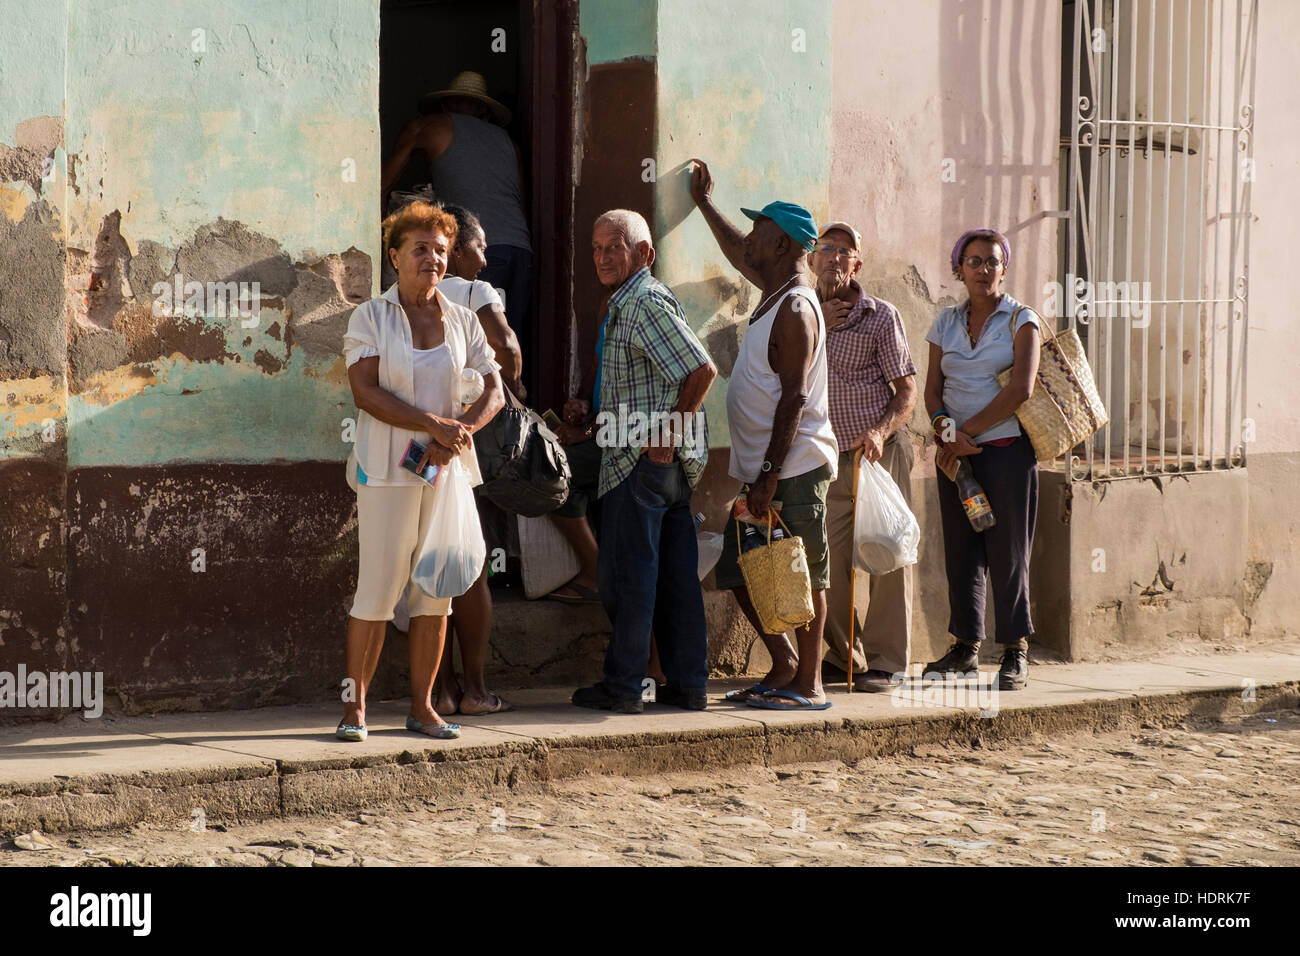 People queue for the milk ration on a street in Trinidad, Cuba Stock Photo